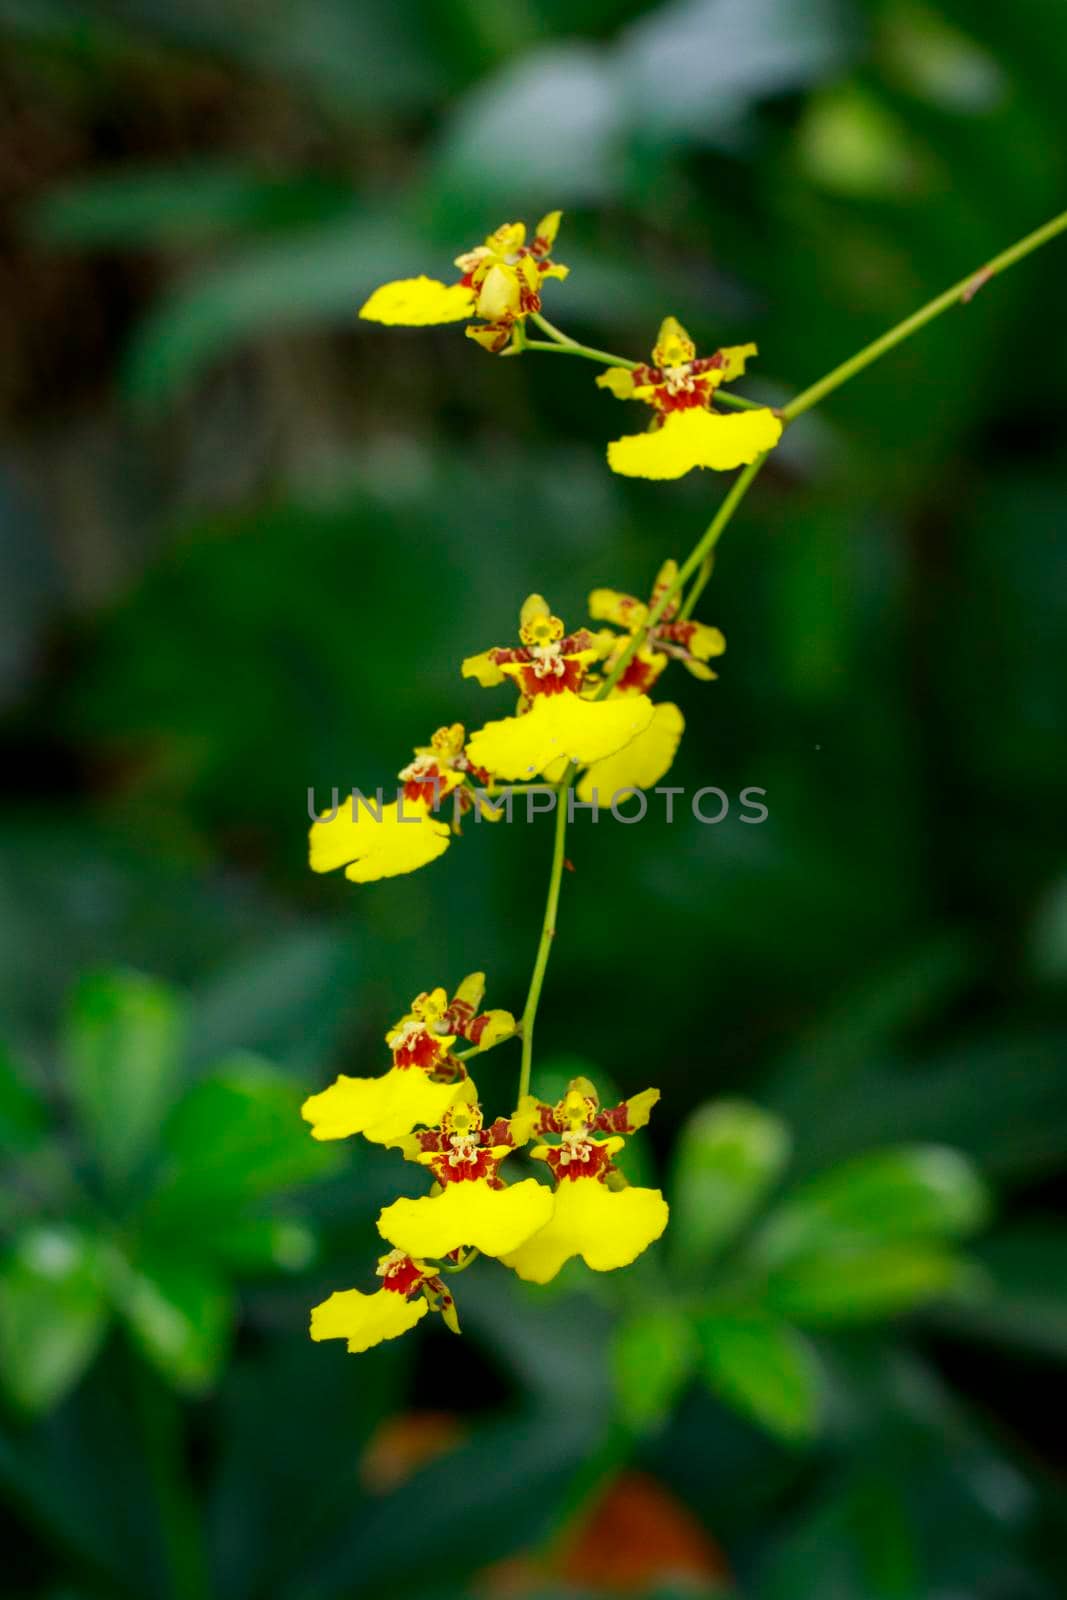 Image of yellow oncidium orchid flower in the garden.